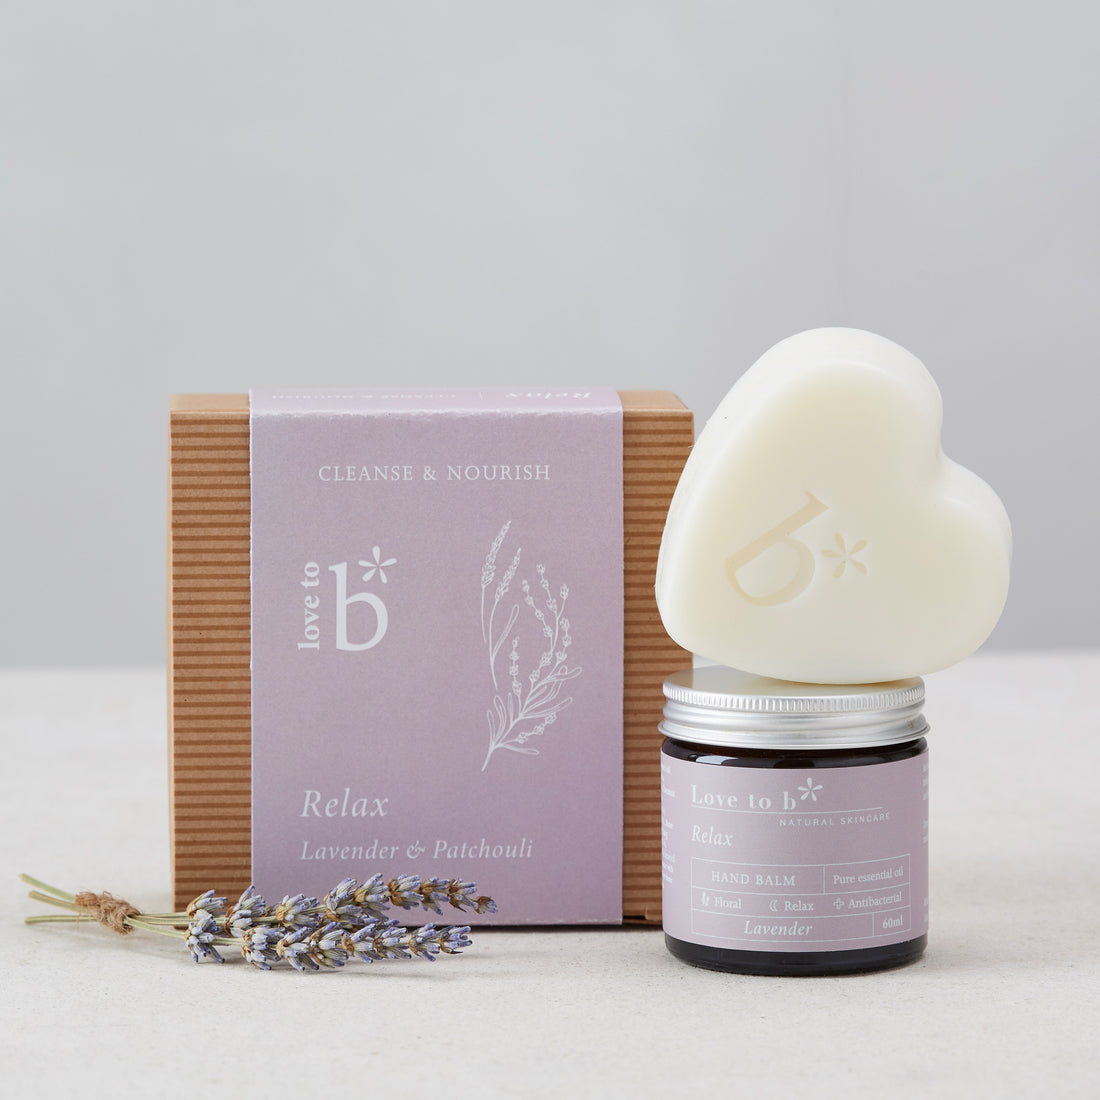 Love to b Natural Skincare Relaxing Lavender &amp; Patchouli Cleanse &amp; Nourish Gift Box with Relaxing Lavender Hand Balm &amp; Relaxing Lavender Heart Shaped Soap